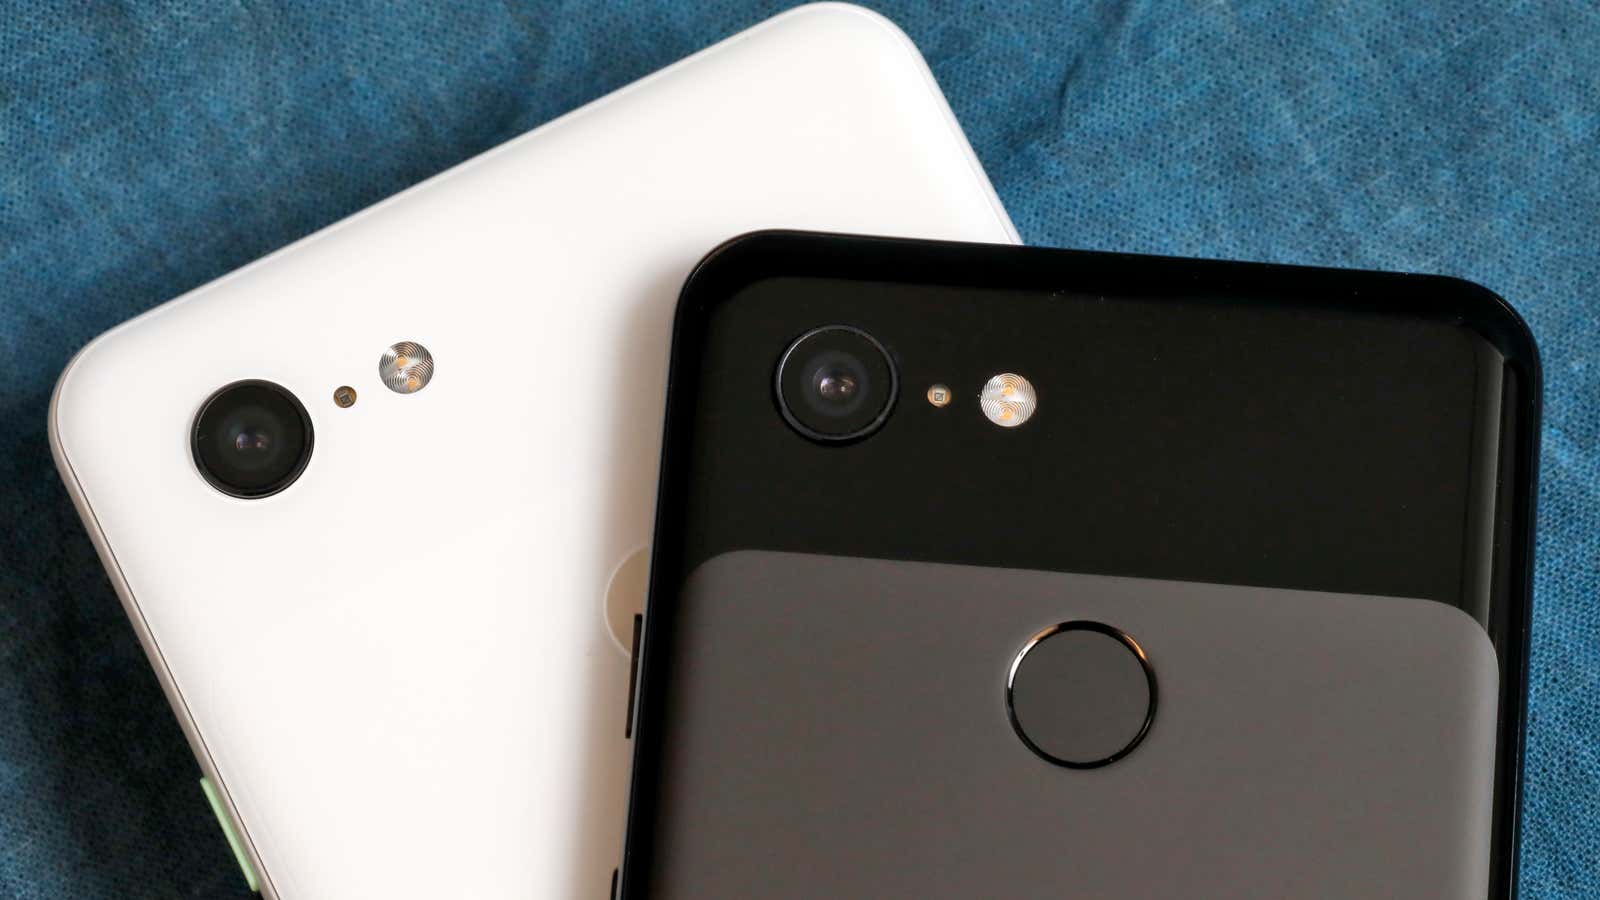 What comes after the Pixel 3?